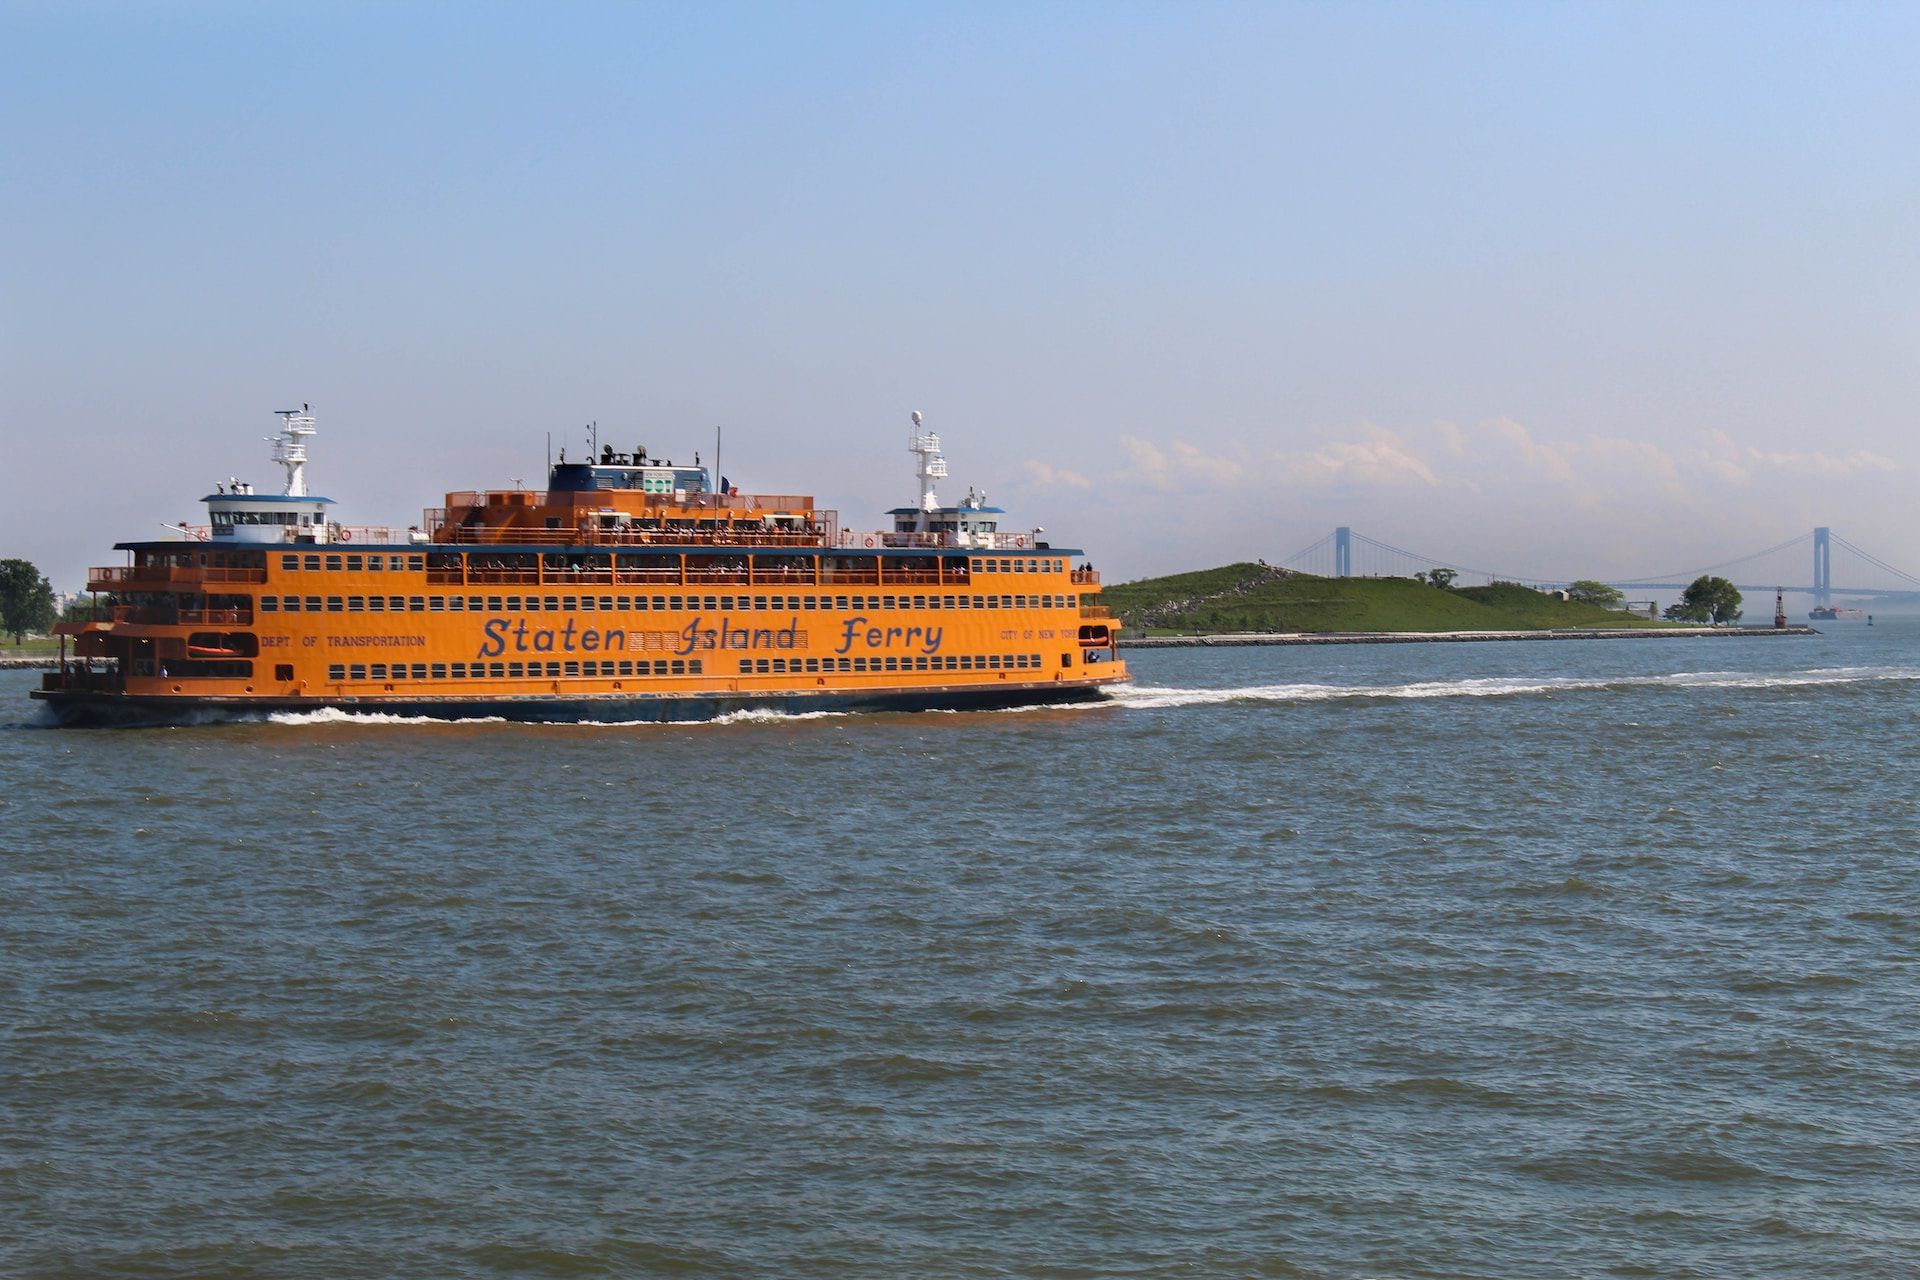 Staten Island Ferry in New York City traversing the water with green terrain and a bridge in the background